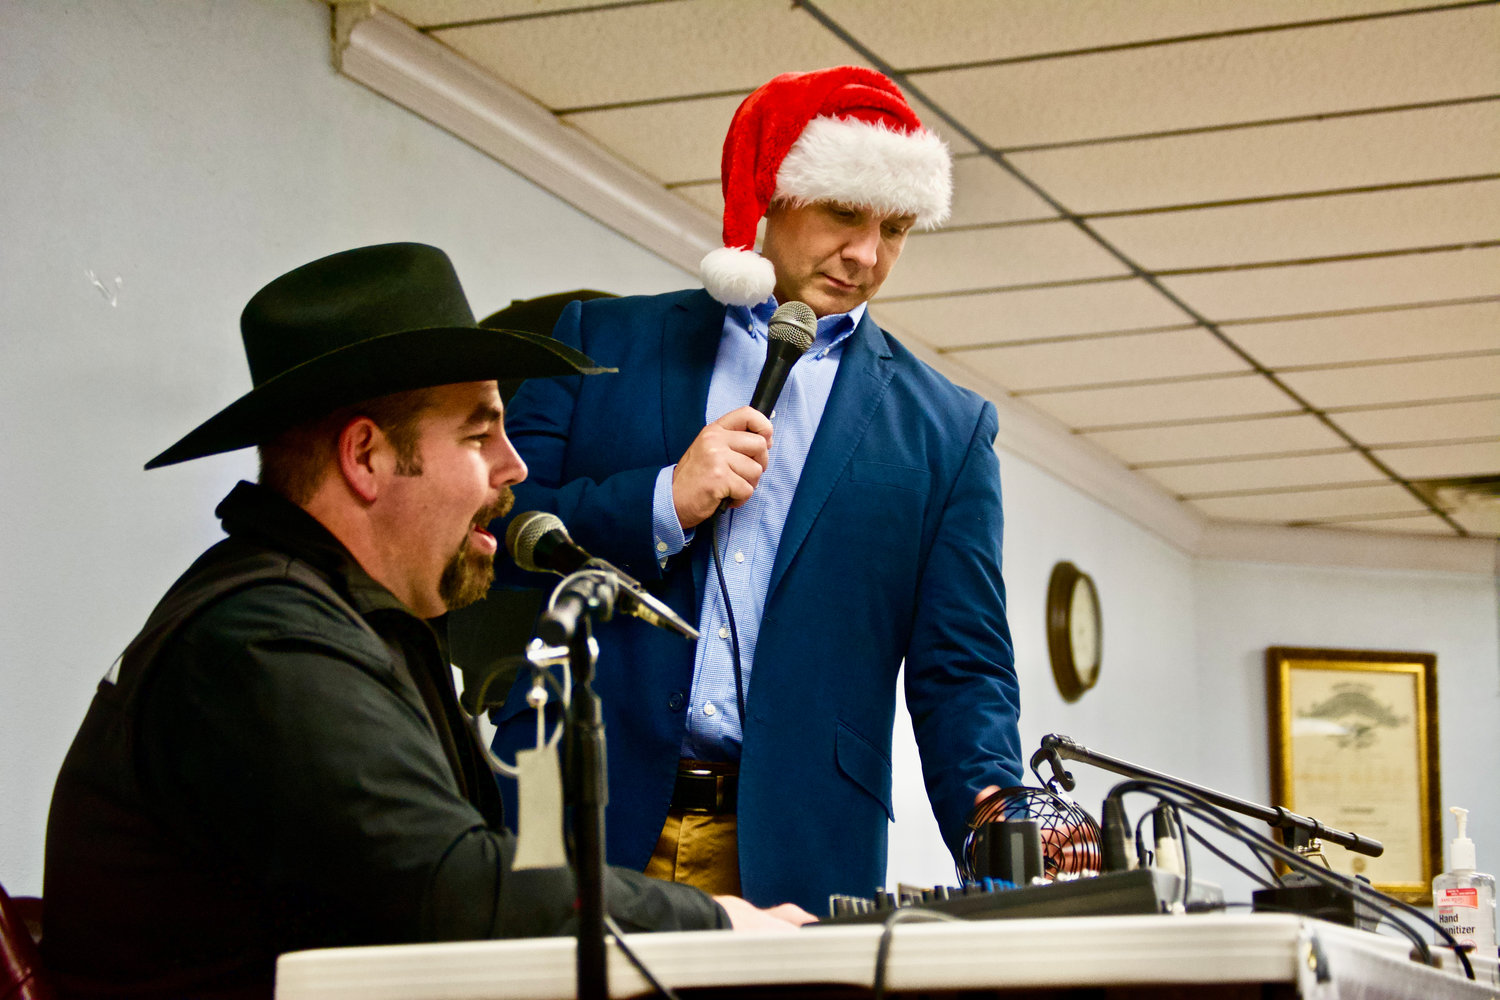 Bruce Kimsey emceed with Peter Abbarno at turkey bingo Saturday night, which was a Twin Cities Rotary fundraiser for wheelchair accessible ramps.